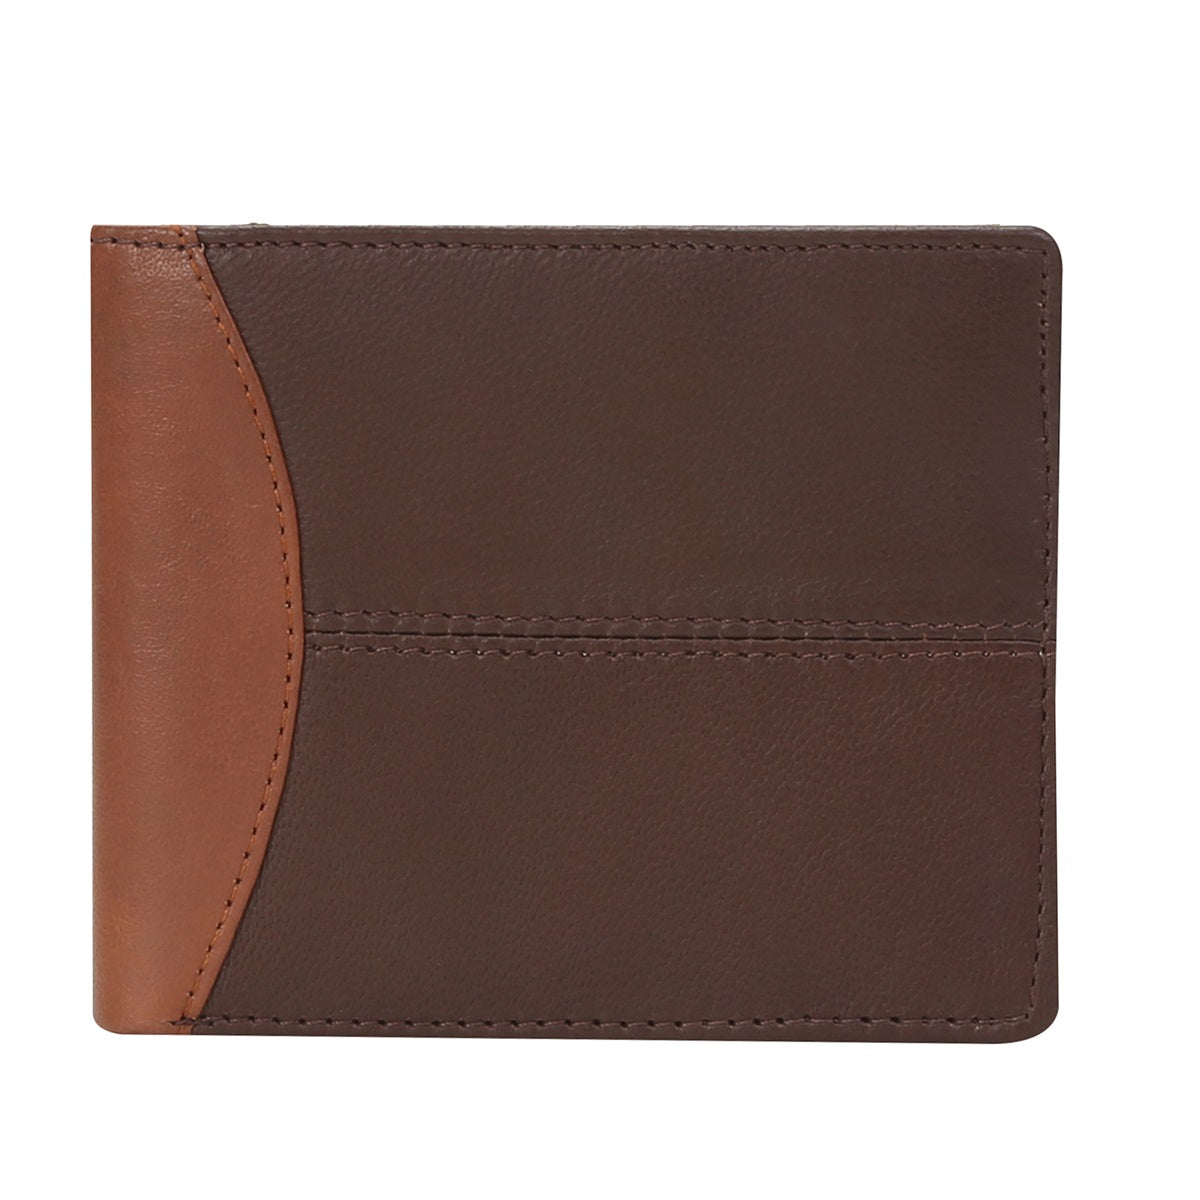 Brown With Lt. Brown Color Combination Leather Wallet For Men By Brune